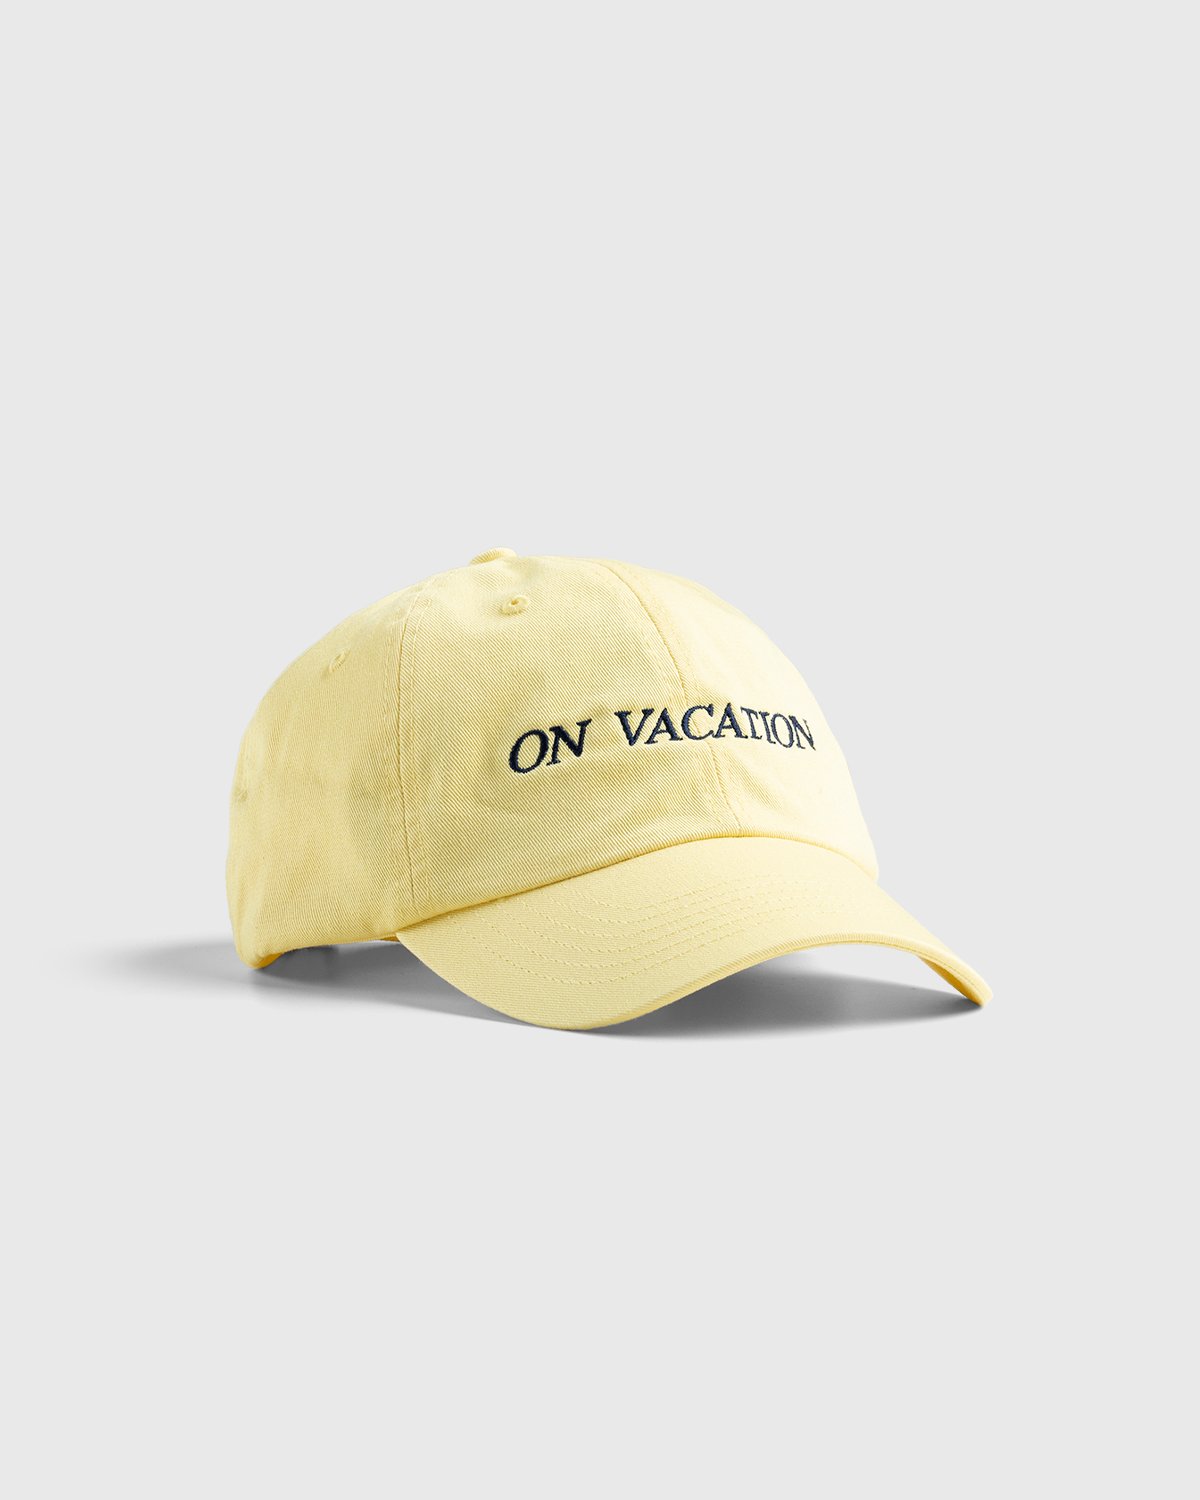 HO HO COCO - On Vacation Cap Yellow - Accessories - Yellow - Image 1